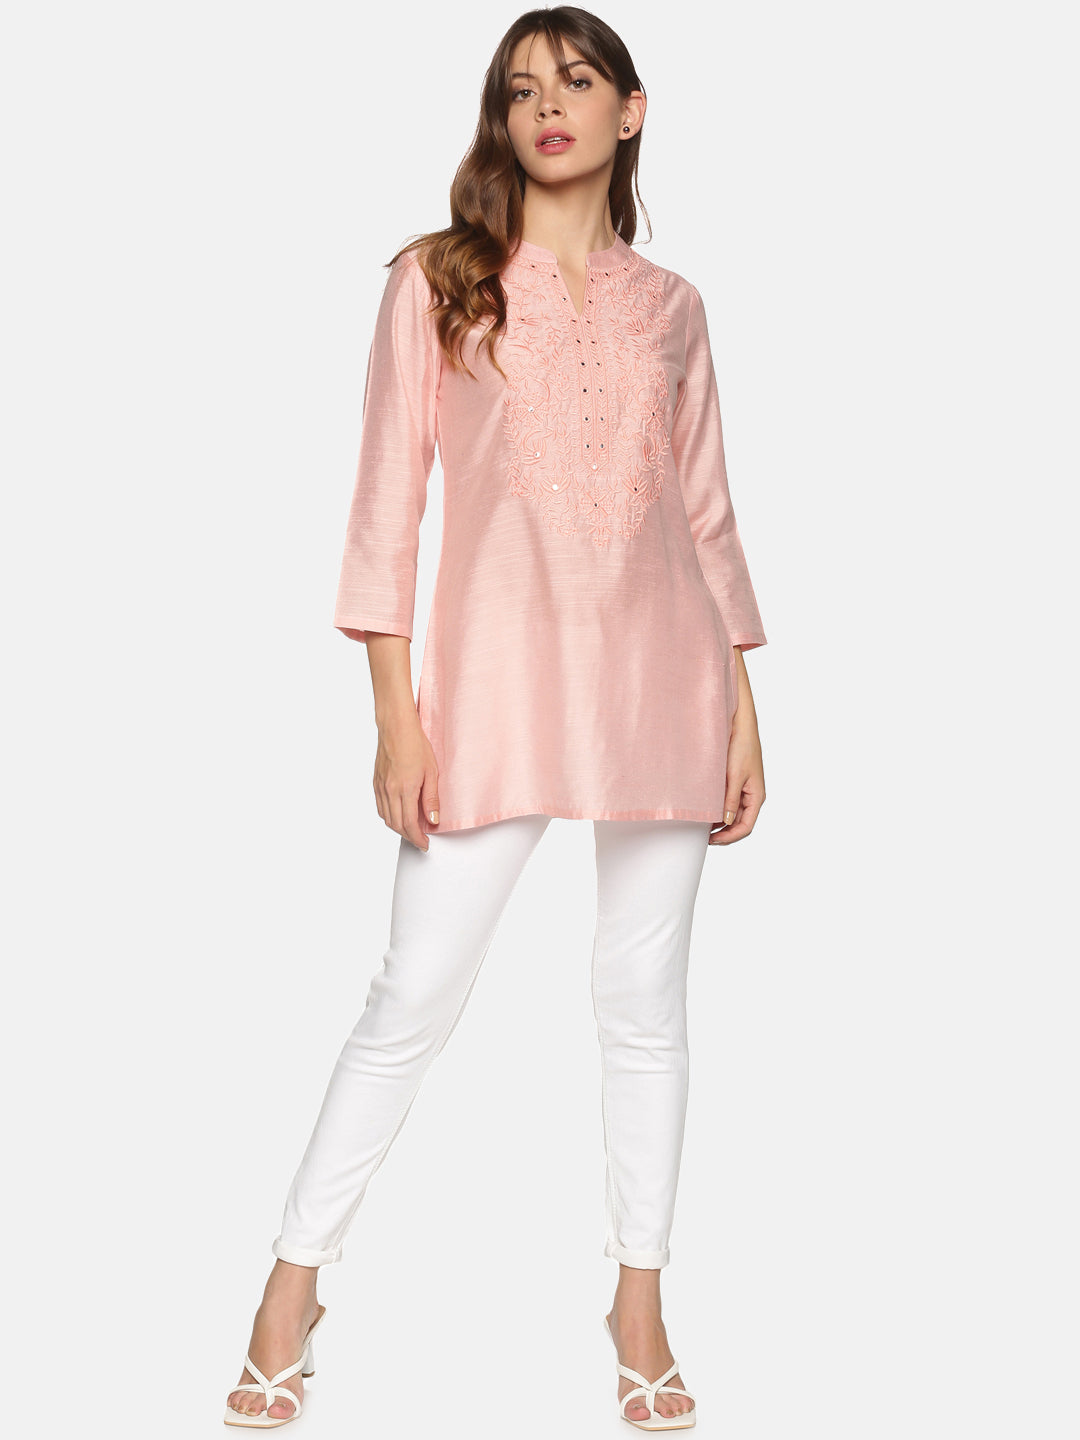 Pink Art Raw Silk Tunic with Floral Embroidered Neck & Mirror Accents